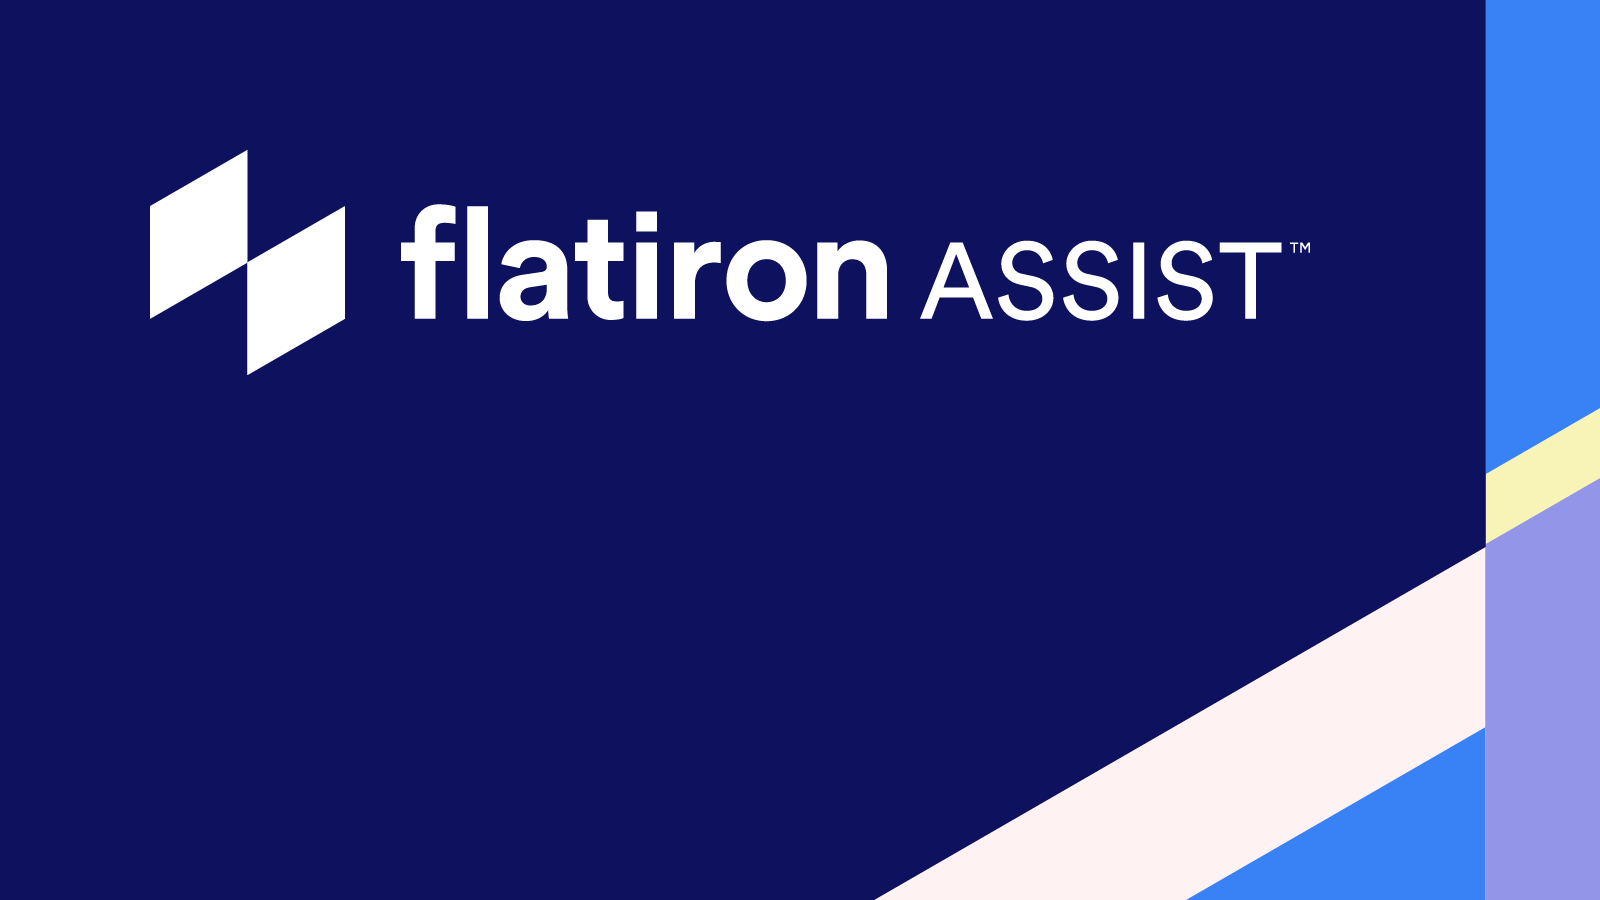 CMS confirms Flatiron Assist™ clinical guidelines meet requirements of the Enhancing Oncology Model